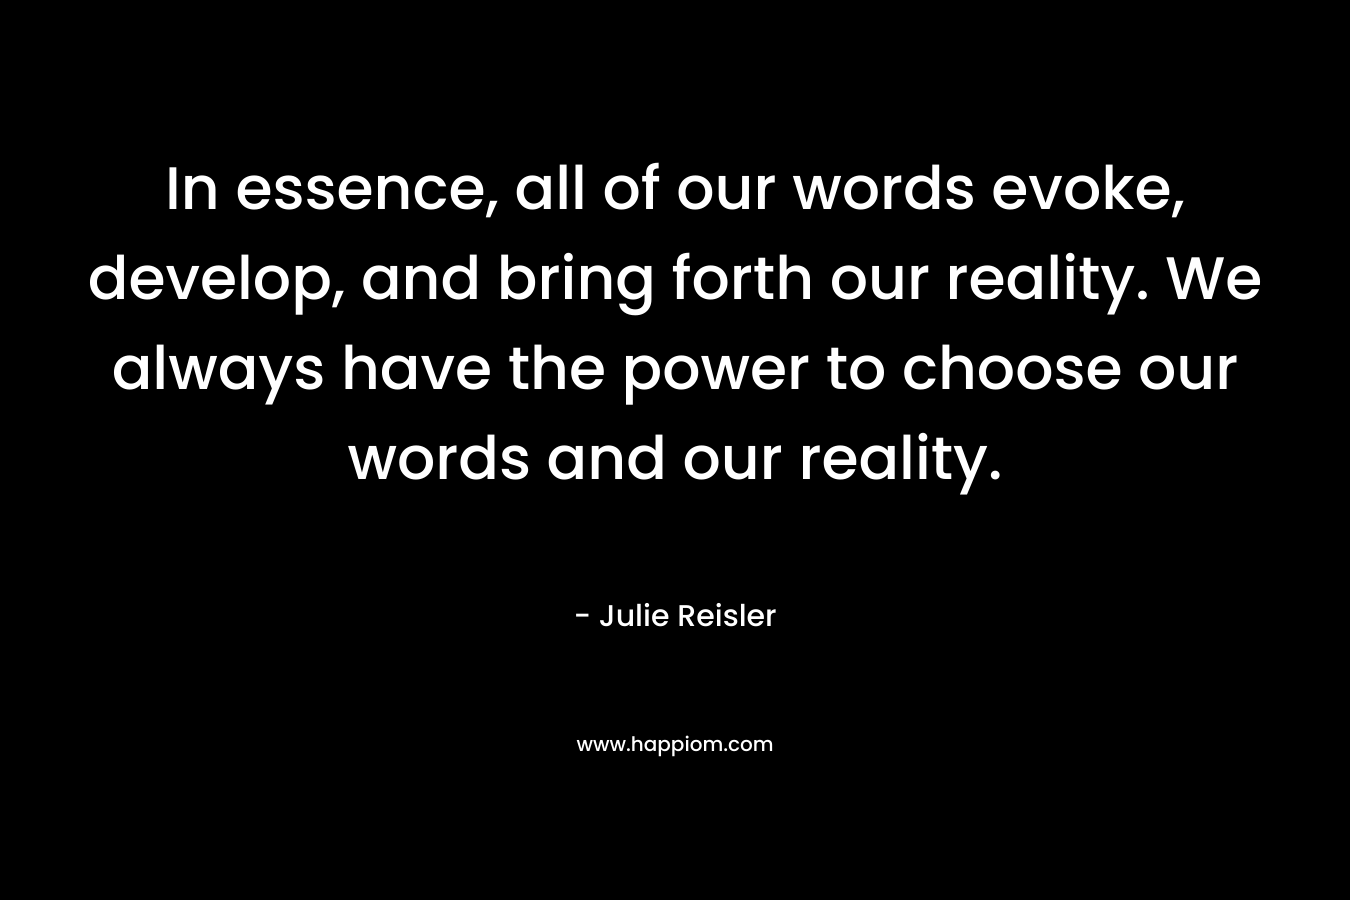 In essence, all of our words evoke, develop, and bring forth our reality. We always have the power to choose our words and our reality.